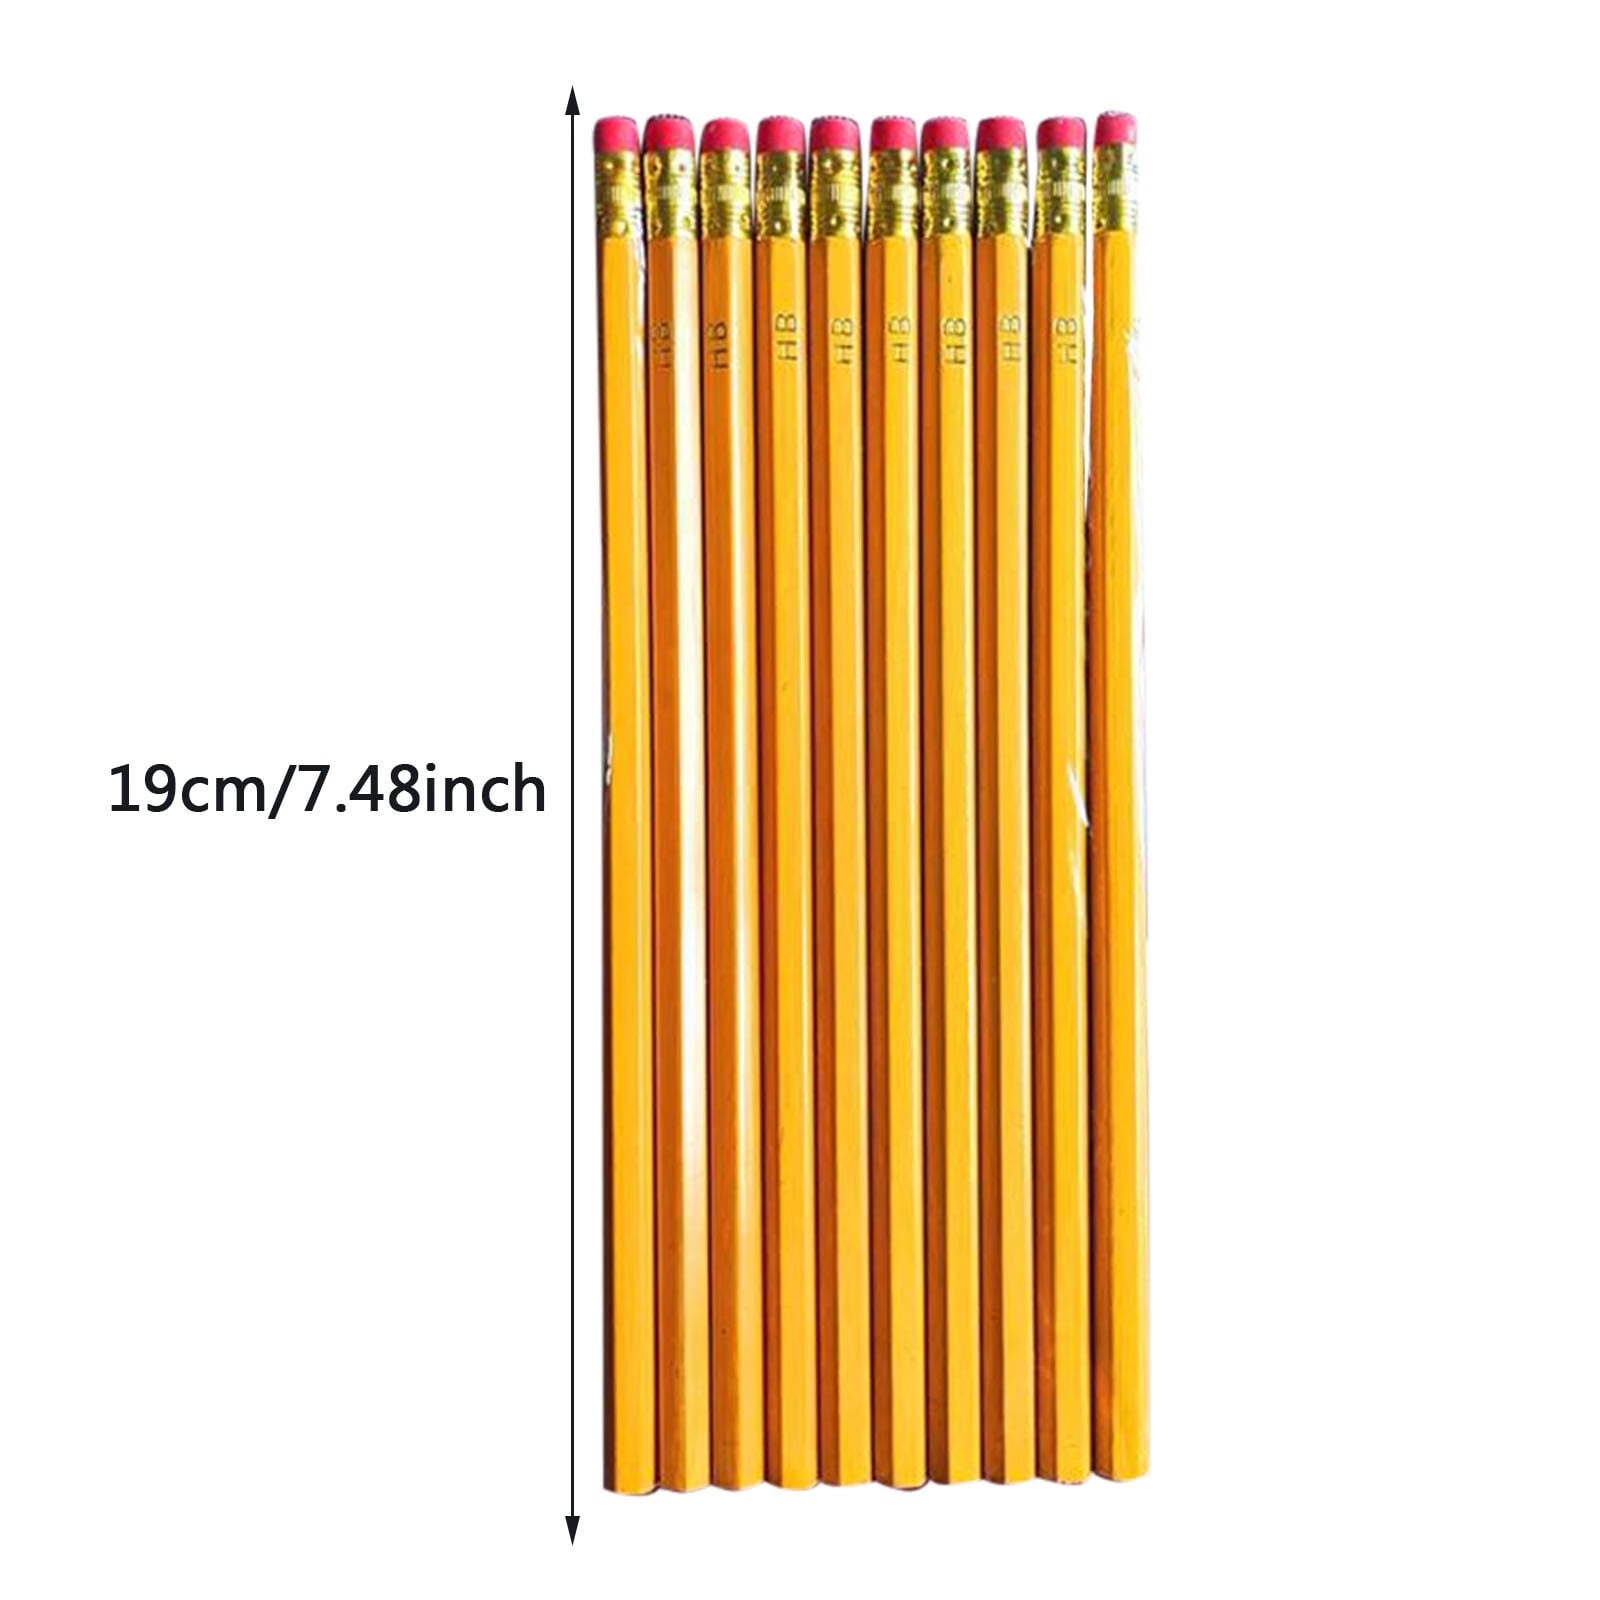 Naler Happy Birthday Pencils 50 Count for Students Bulk,Birthday Party  Favors for Kids, Colorful